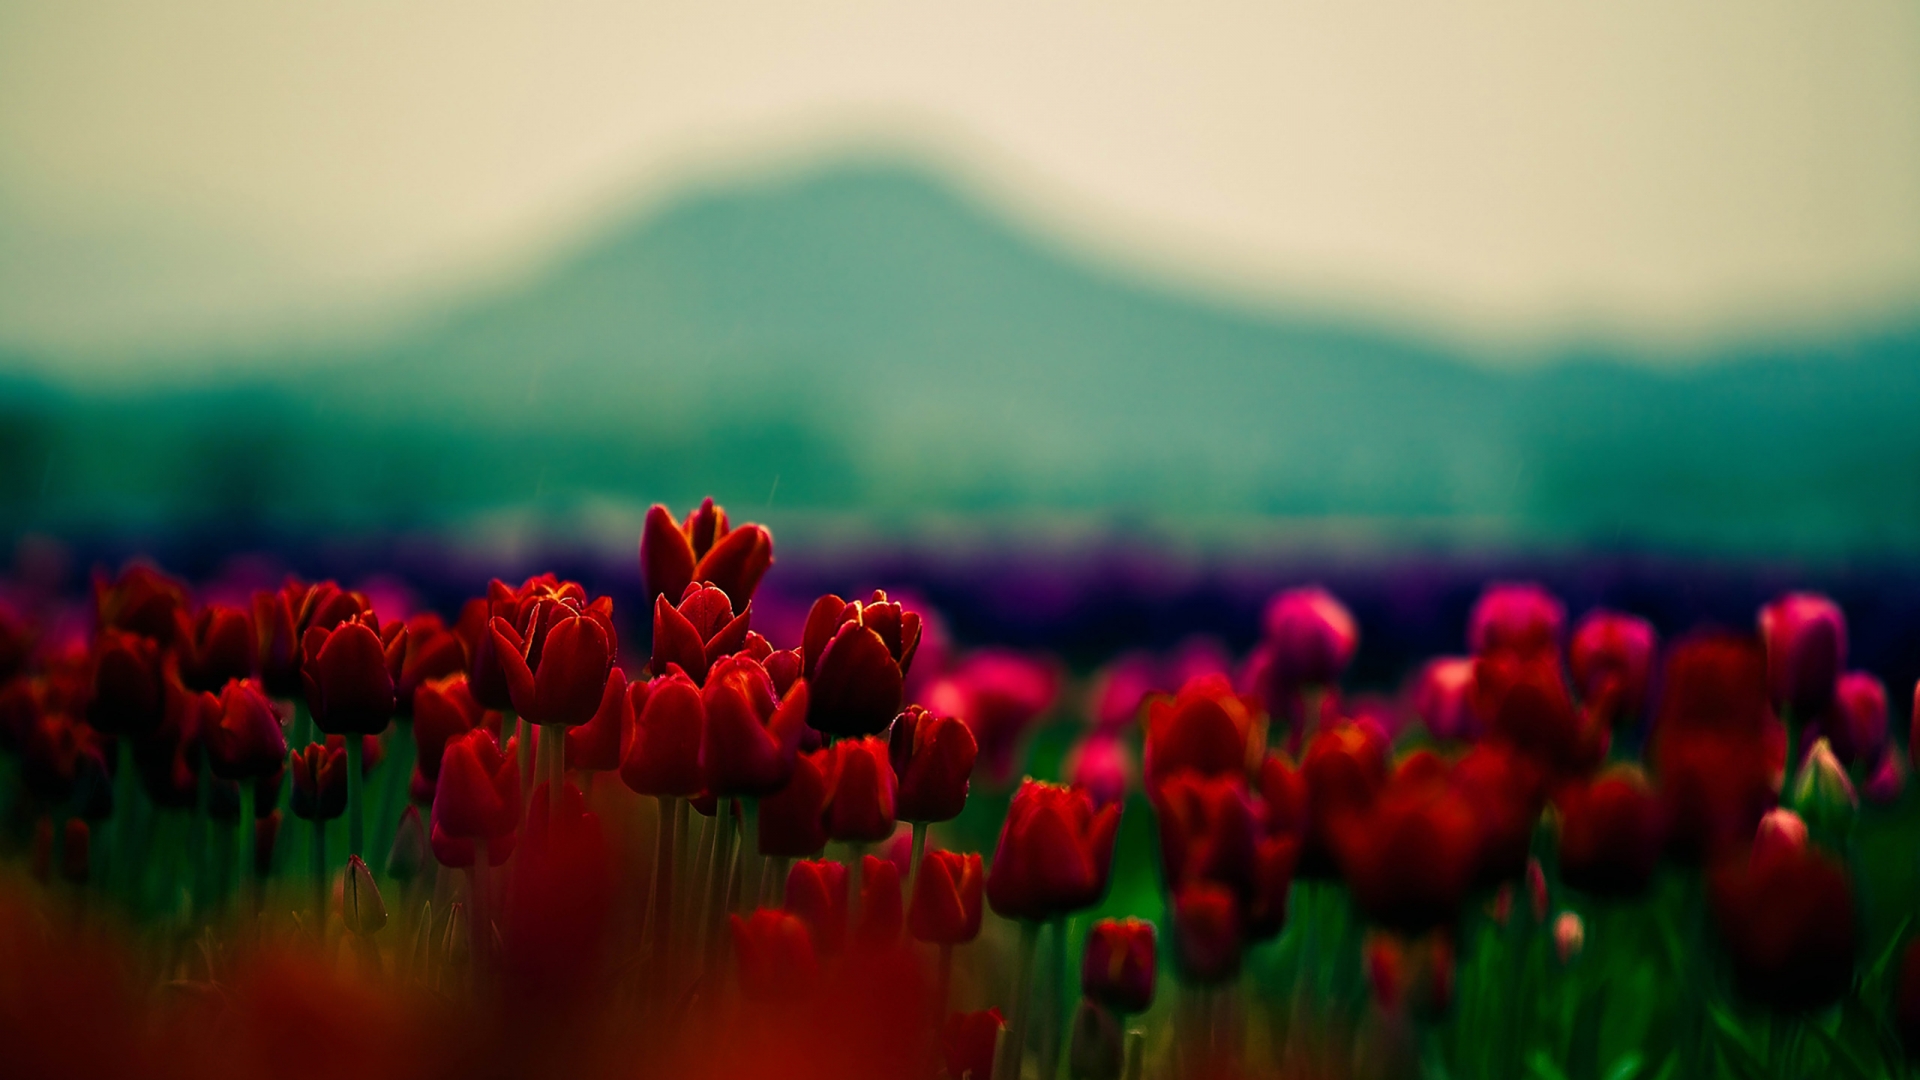 Gorgeous Red Tulips for 1920 x 1080 HDTV 1080p resolution